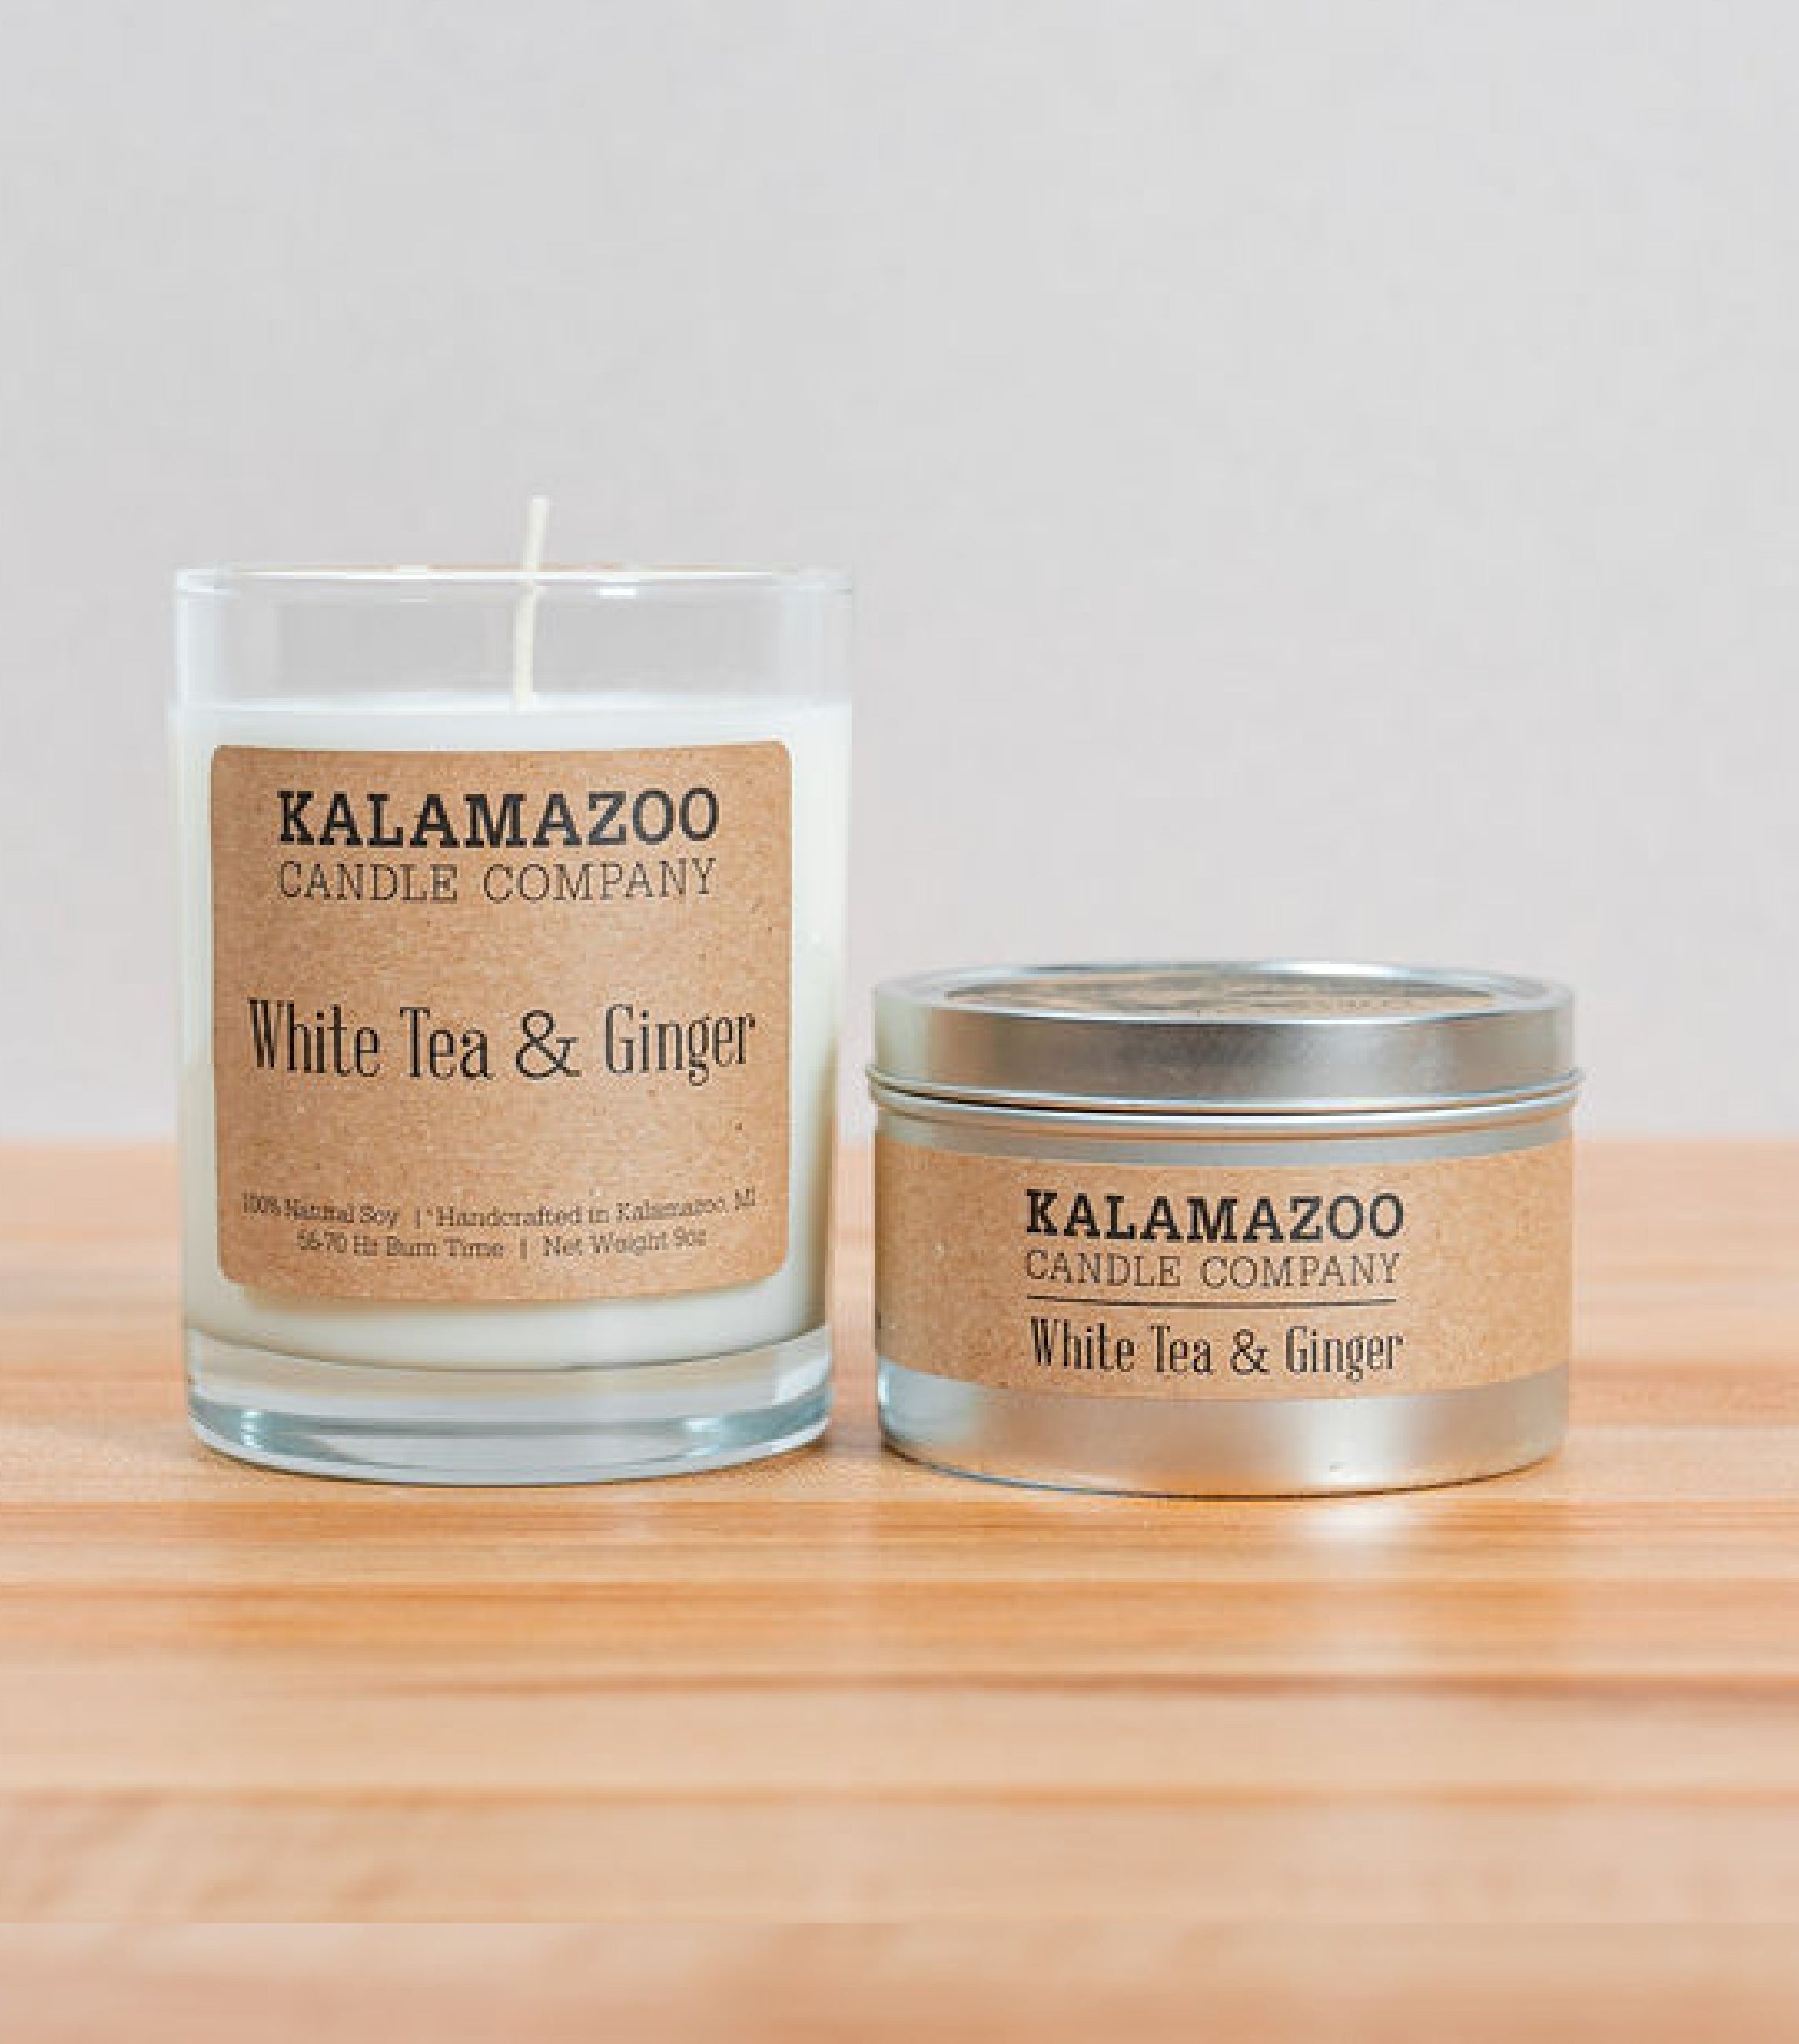 White Tea &amp; Ginger Candles Calming white tea, ginger, yuzu and delicate floral notes quiet your mind and soothe your senses in this relaxing soy candle. All Kalamazoo Candles are: 100% natural scented soy wax; produced using locally sourced and American-made